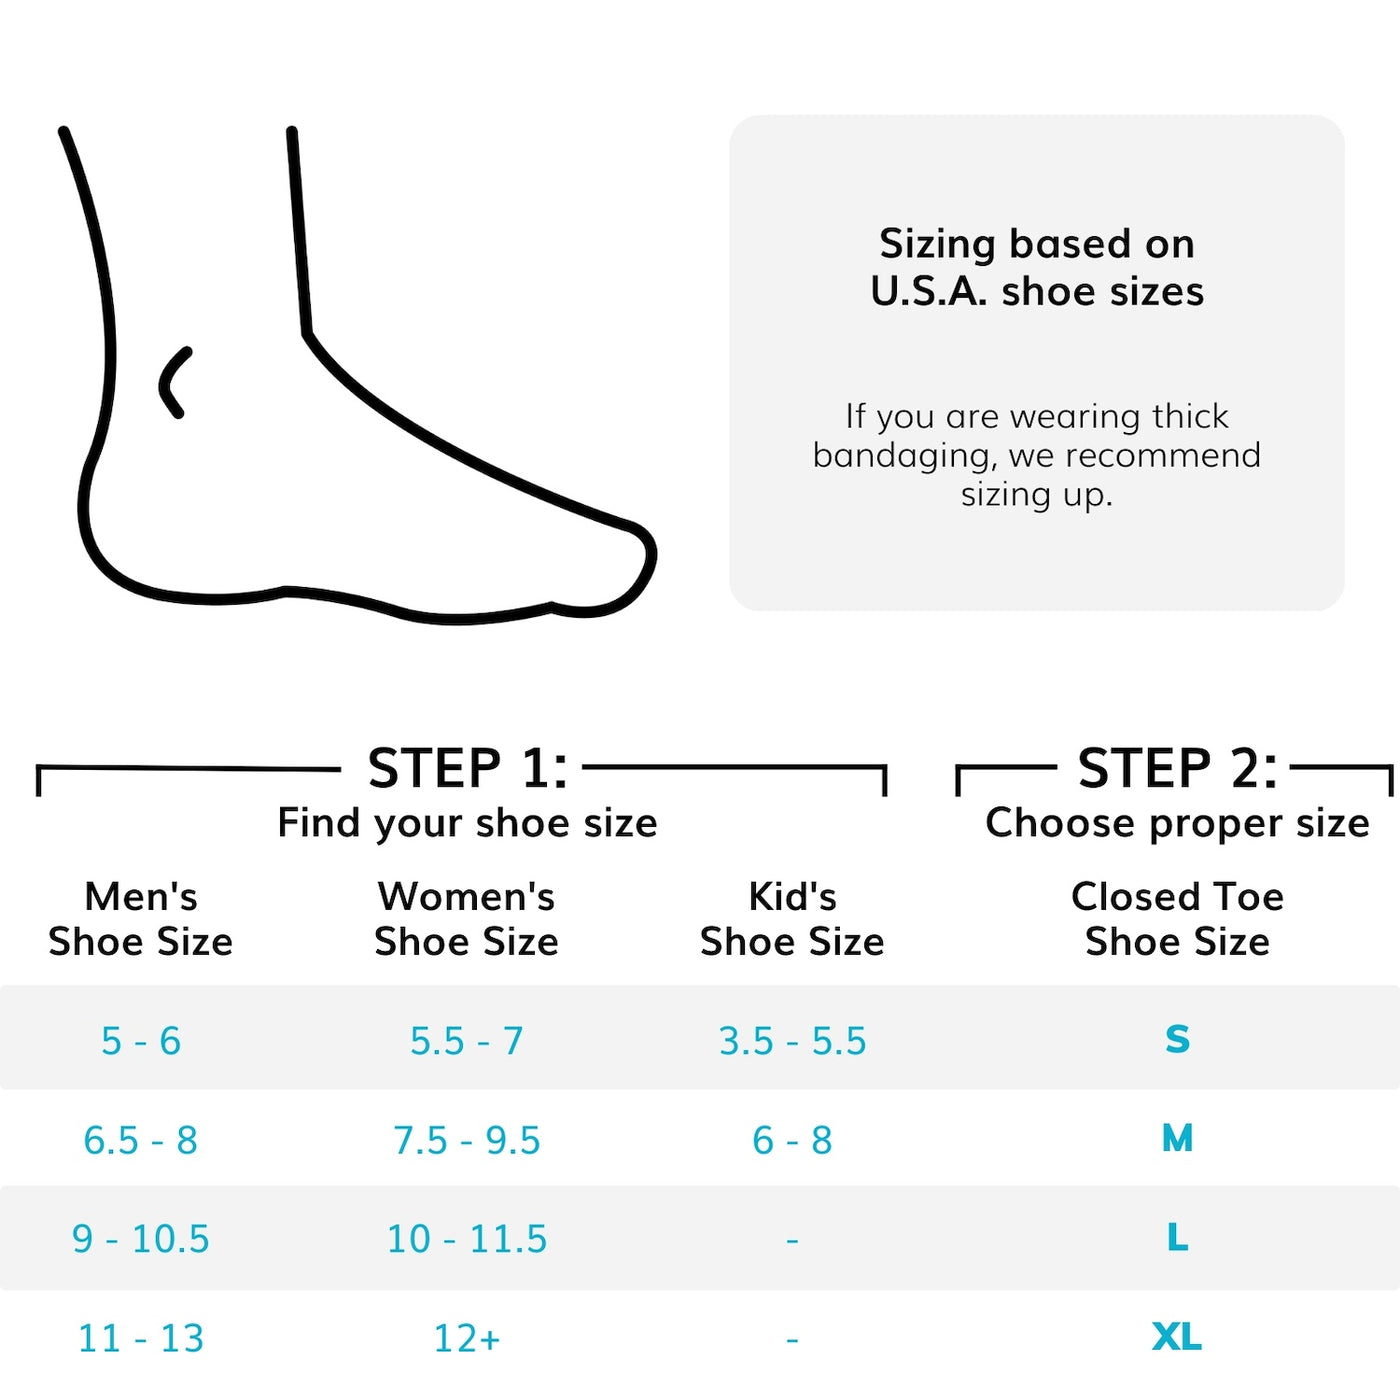 The sizing on the closed toe, post-op shoe has sizes for men and women